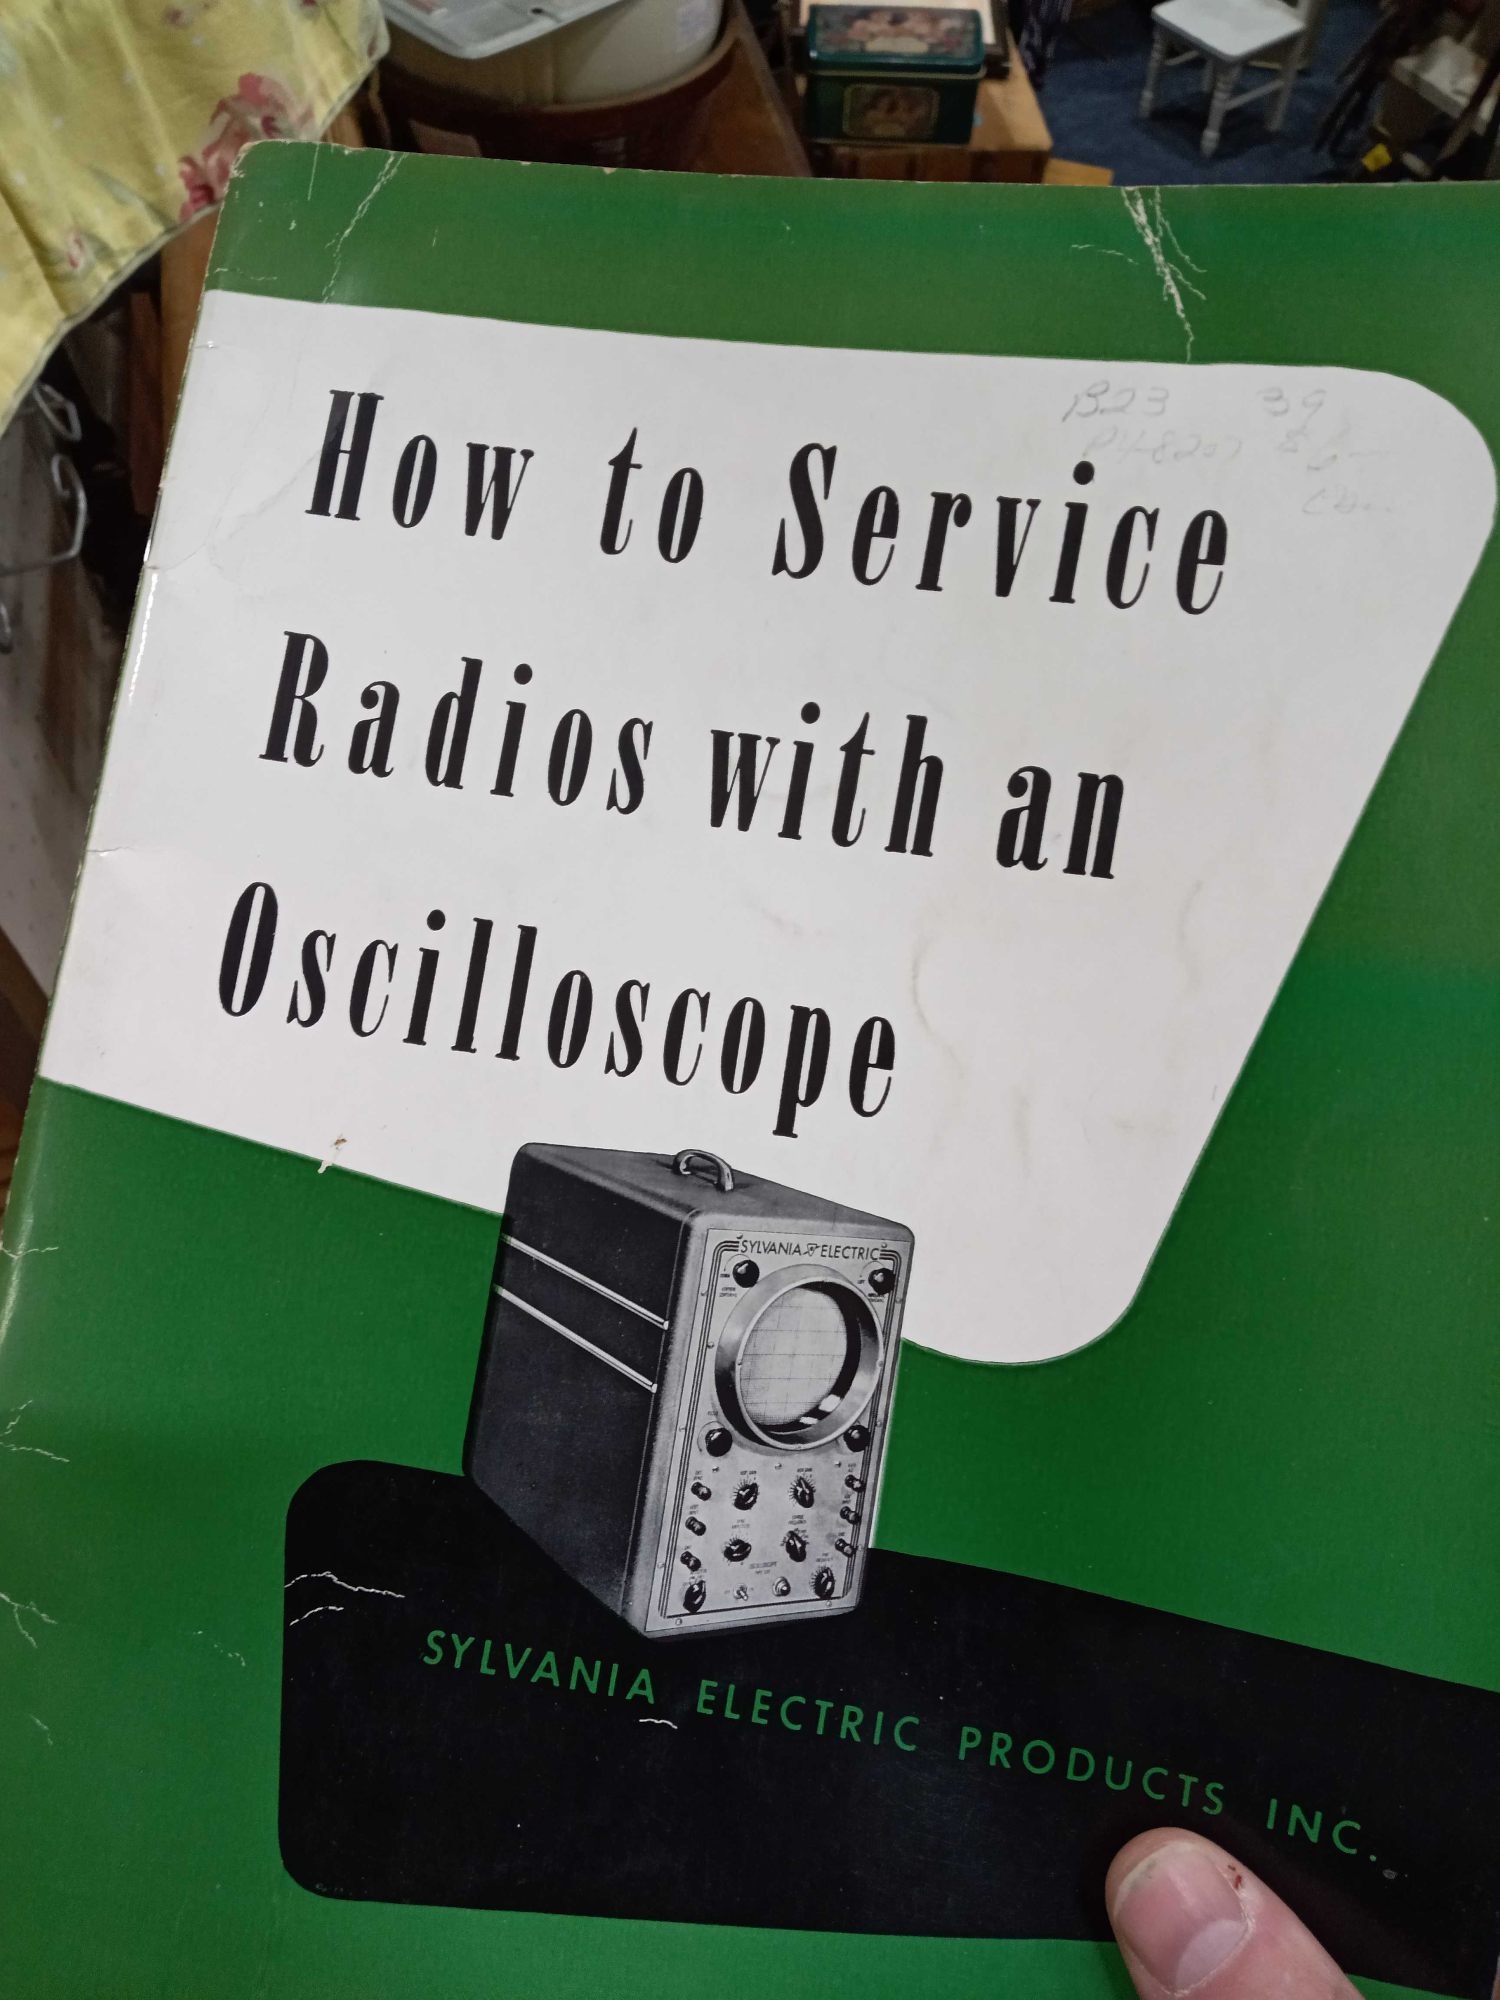 cover of Sylvania Electric Products Inc. publication "How to Service Radios with an Oscilloscope"